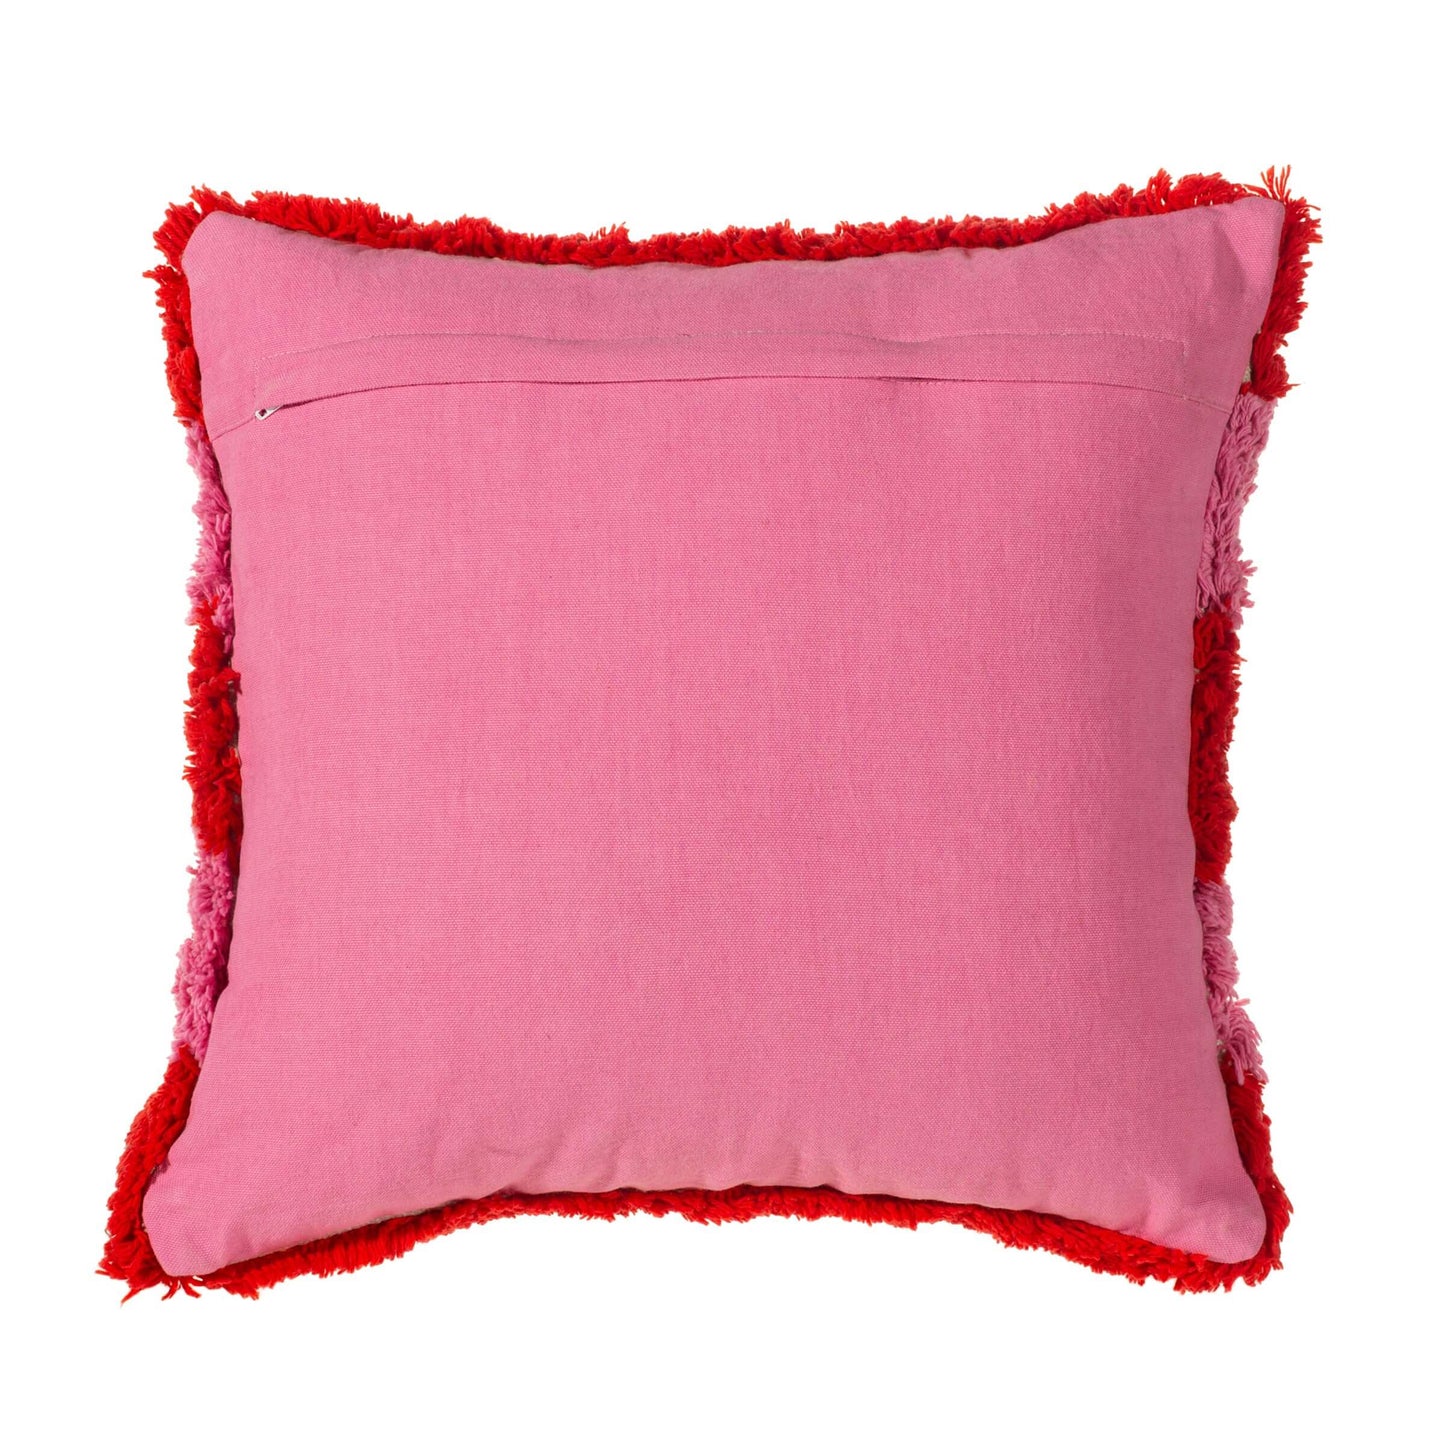 Tufted Stripe Cushion: Pink and Red